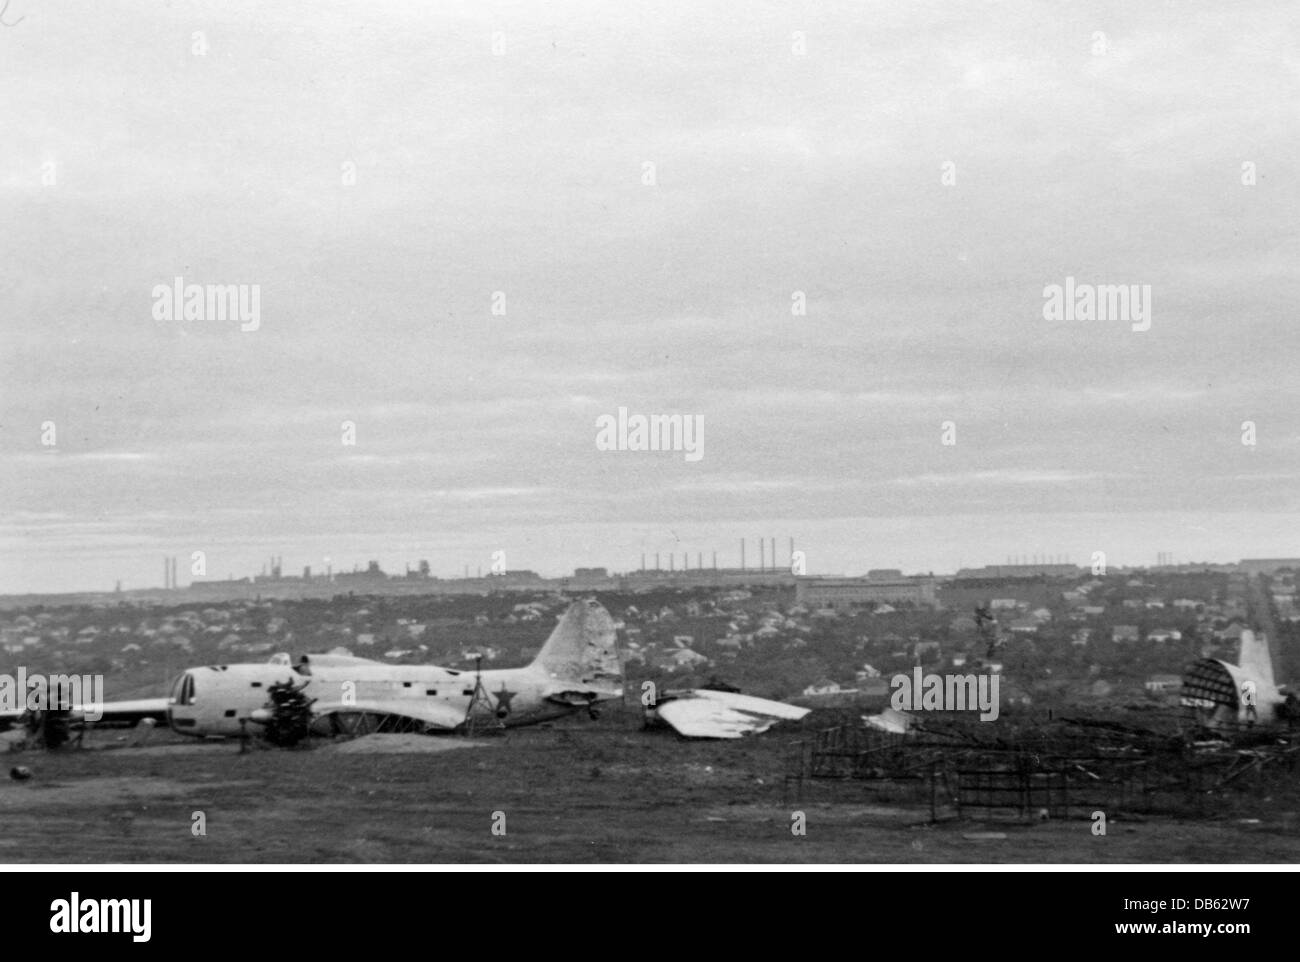 events, Second World War / WWII, aerial warfare, aircraft, crashed / damaged, destroyed Soviet bomber Tupolev ANT-40 (SB), photo taken by a member of the German Reich Labour Service, Ukraine, 1941, Additional-Rights-Clearences-Not Available Stock Photo